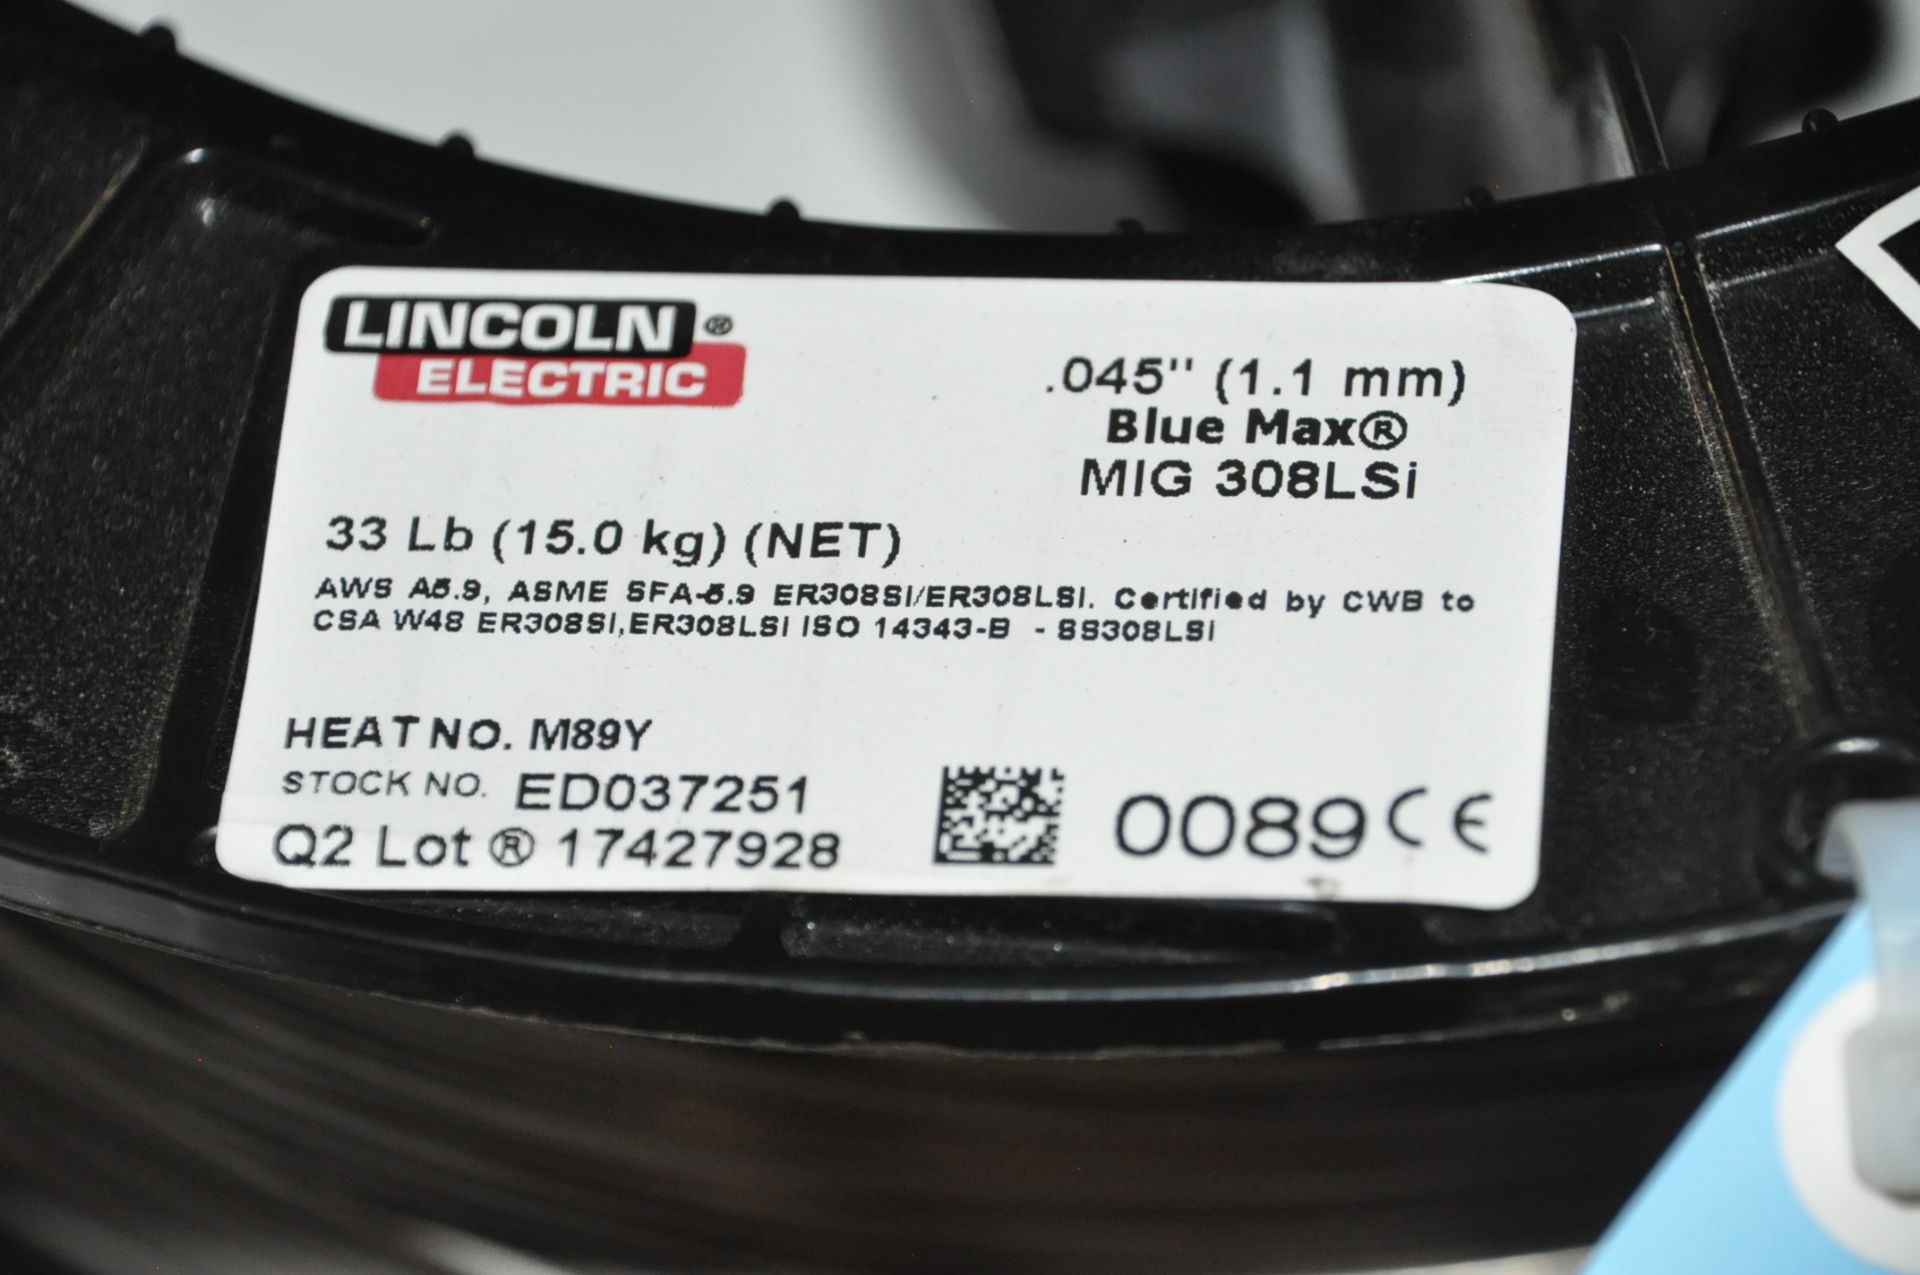 Lincoln Spool of .045 EDO37251 Mig Welding Wire - Image 2 of 2